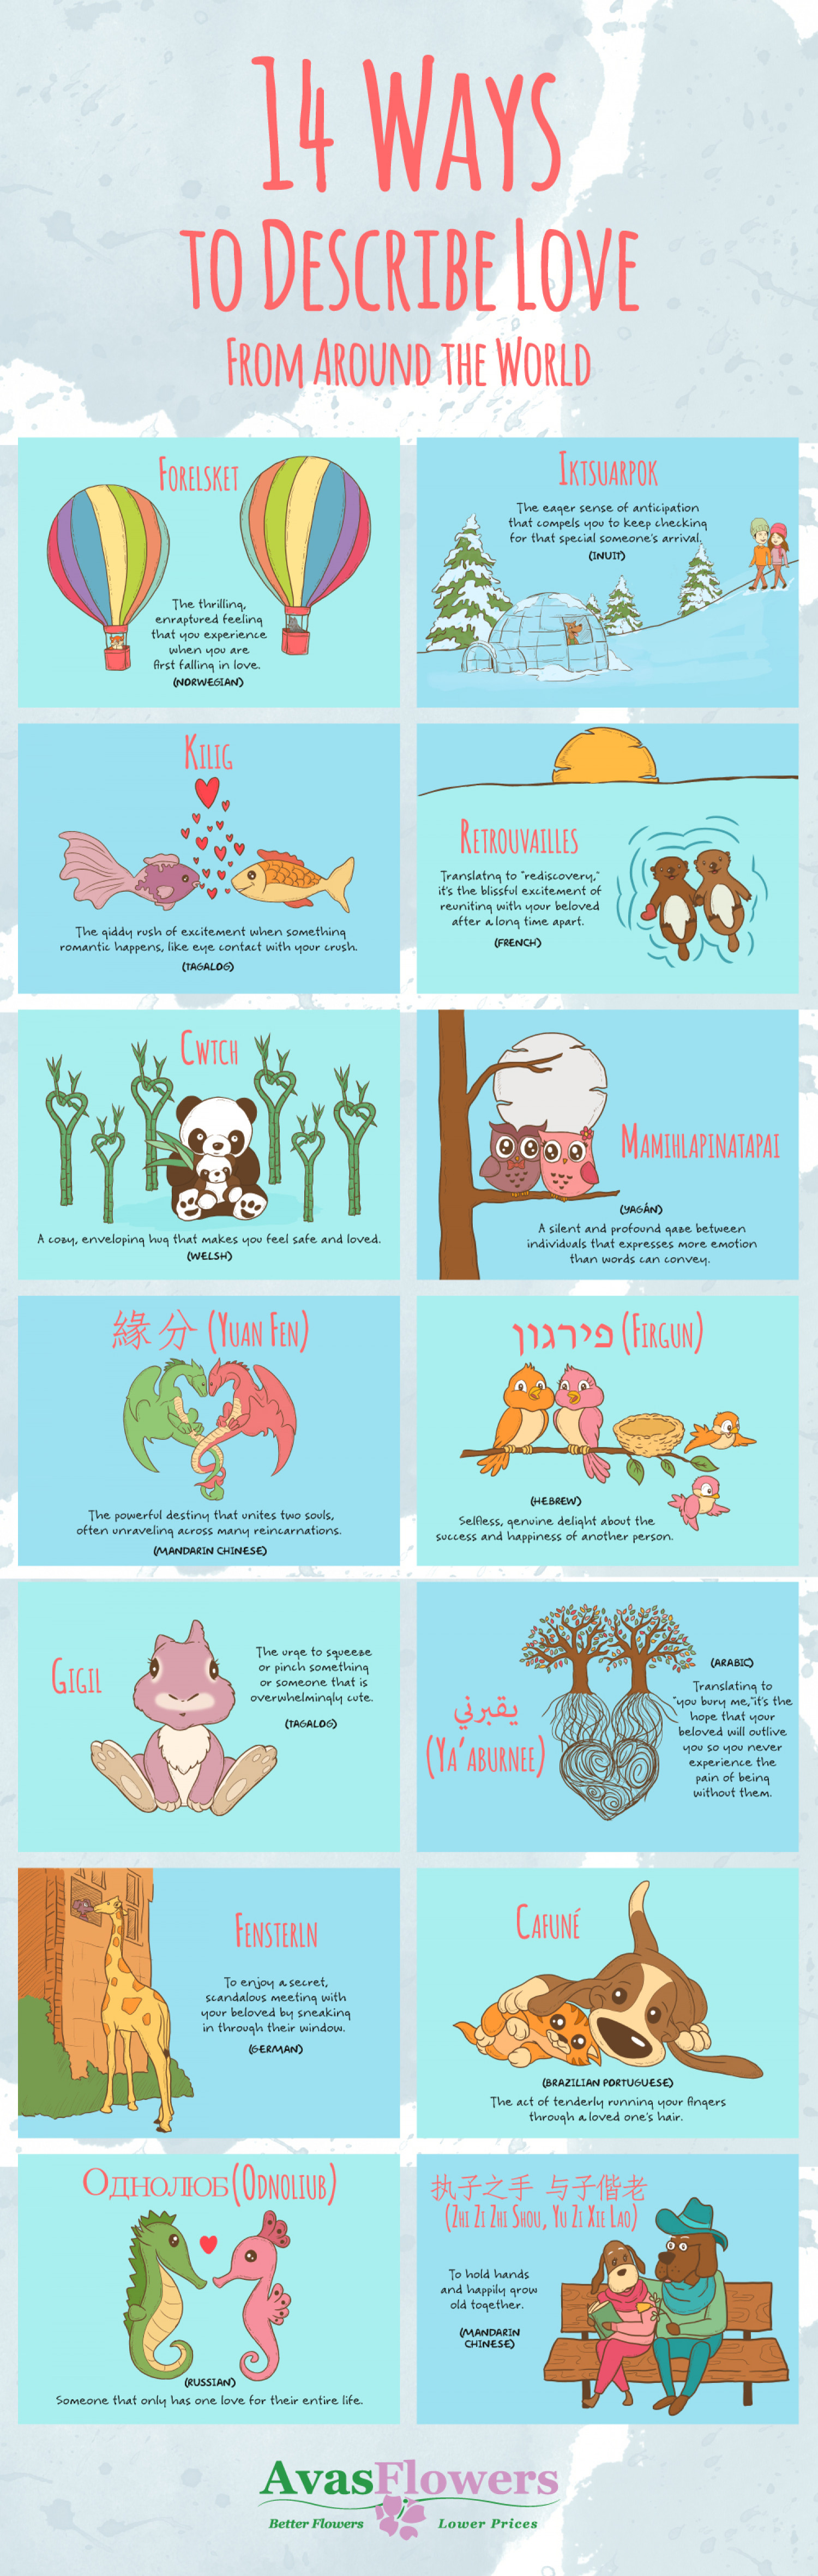 14 Ways to Describe Love From Around the World Infographic